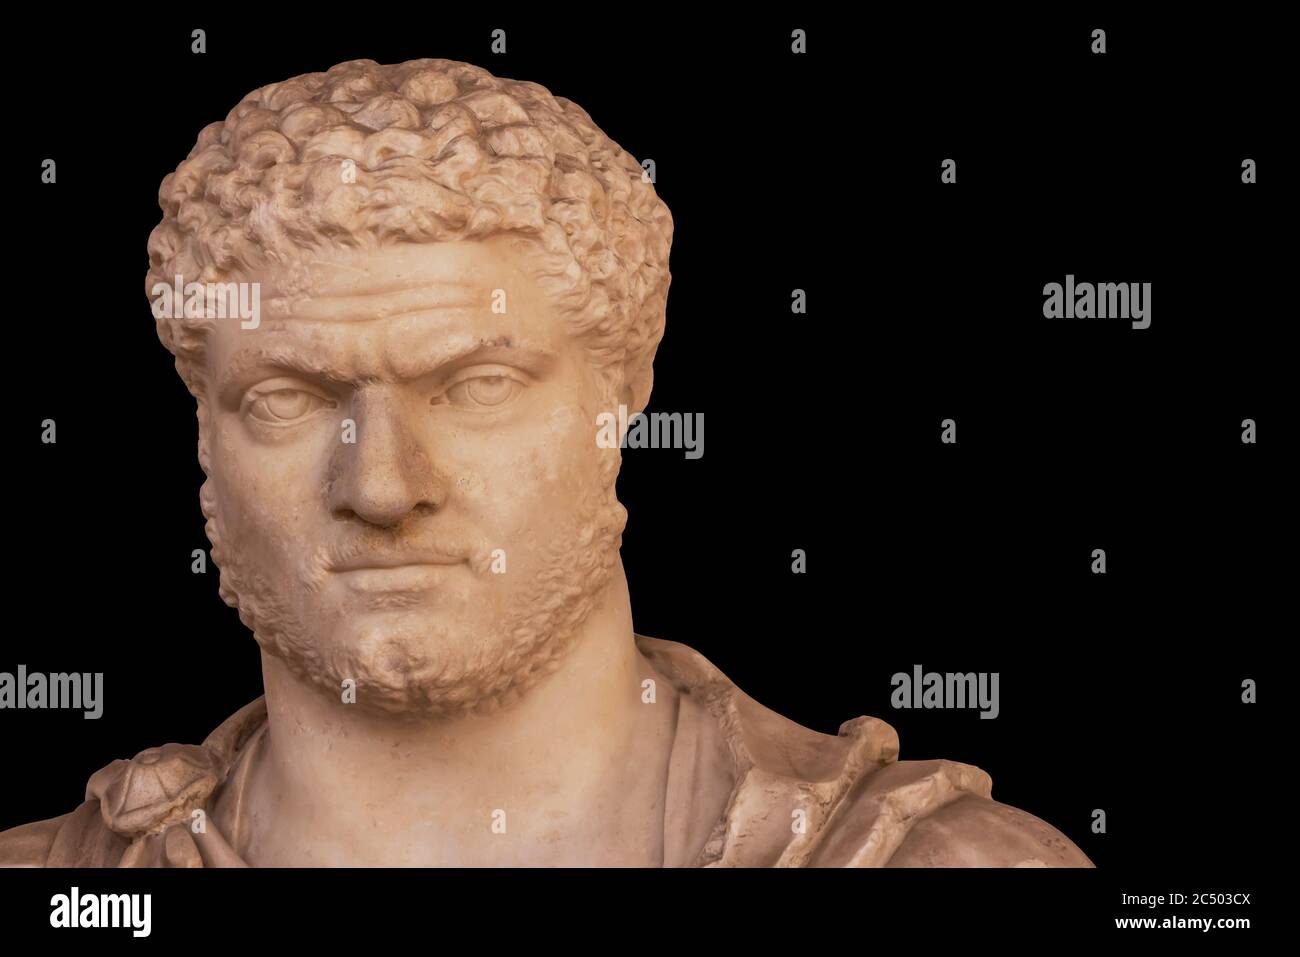 Close-up on face of ancient roman statue of grumpy man Stock Photo